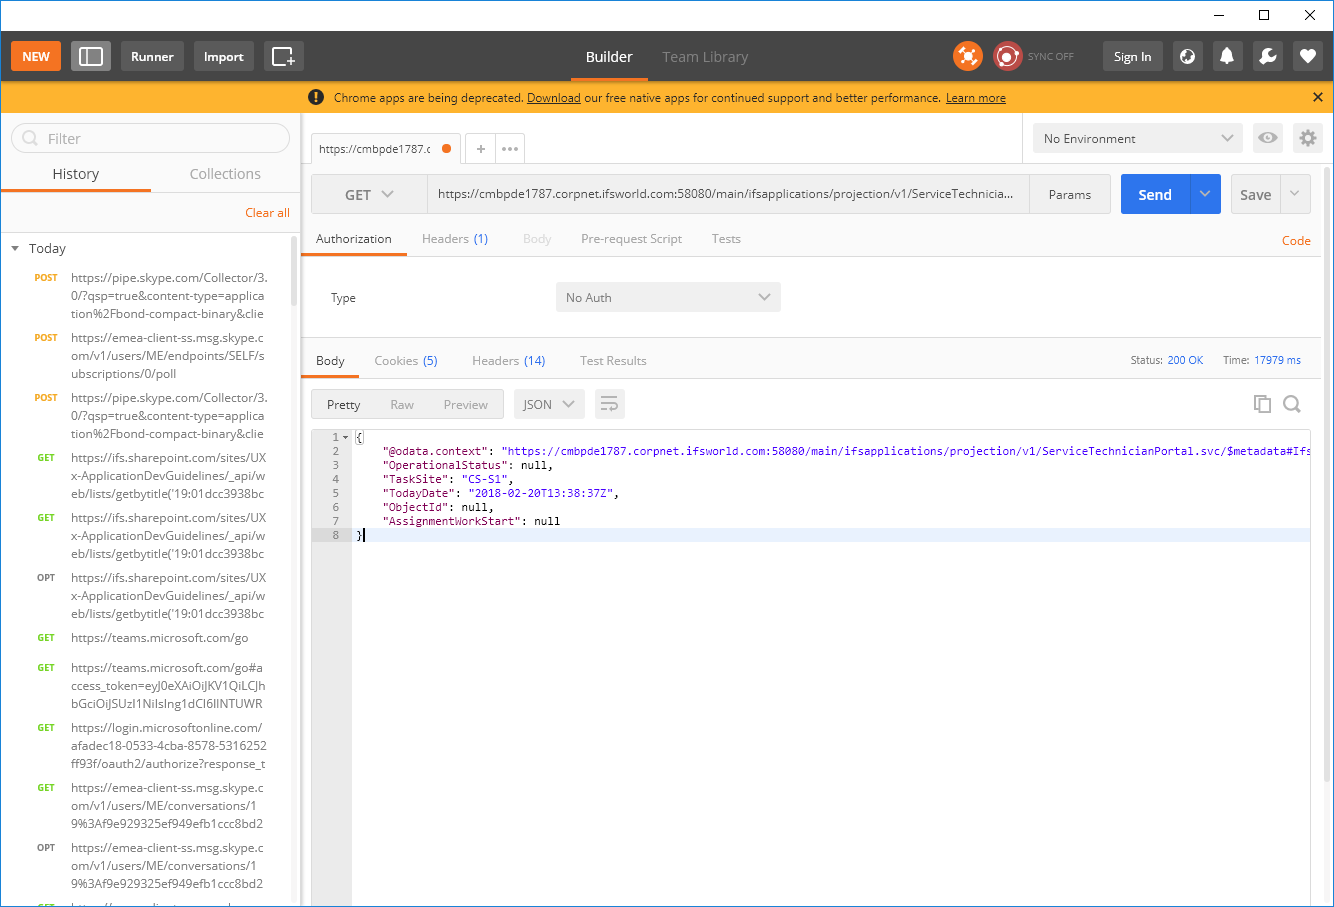 Testing GET request with POSTMAN